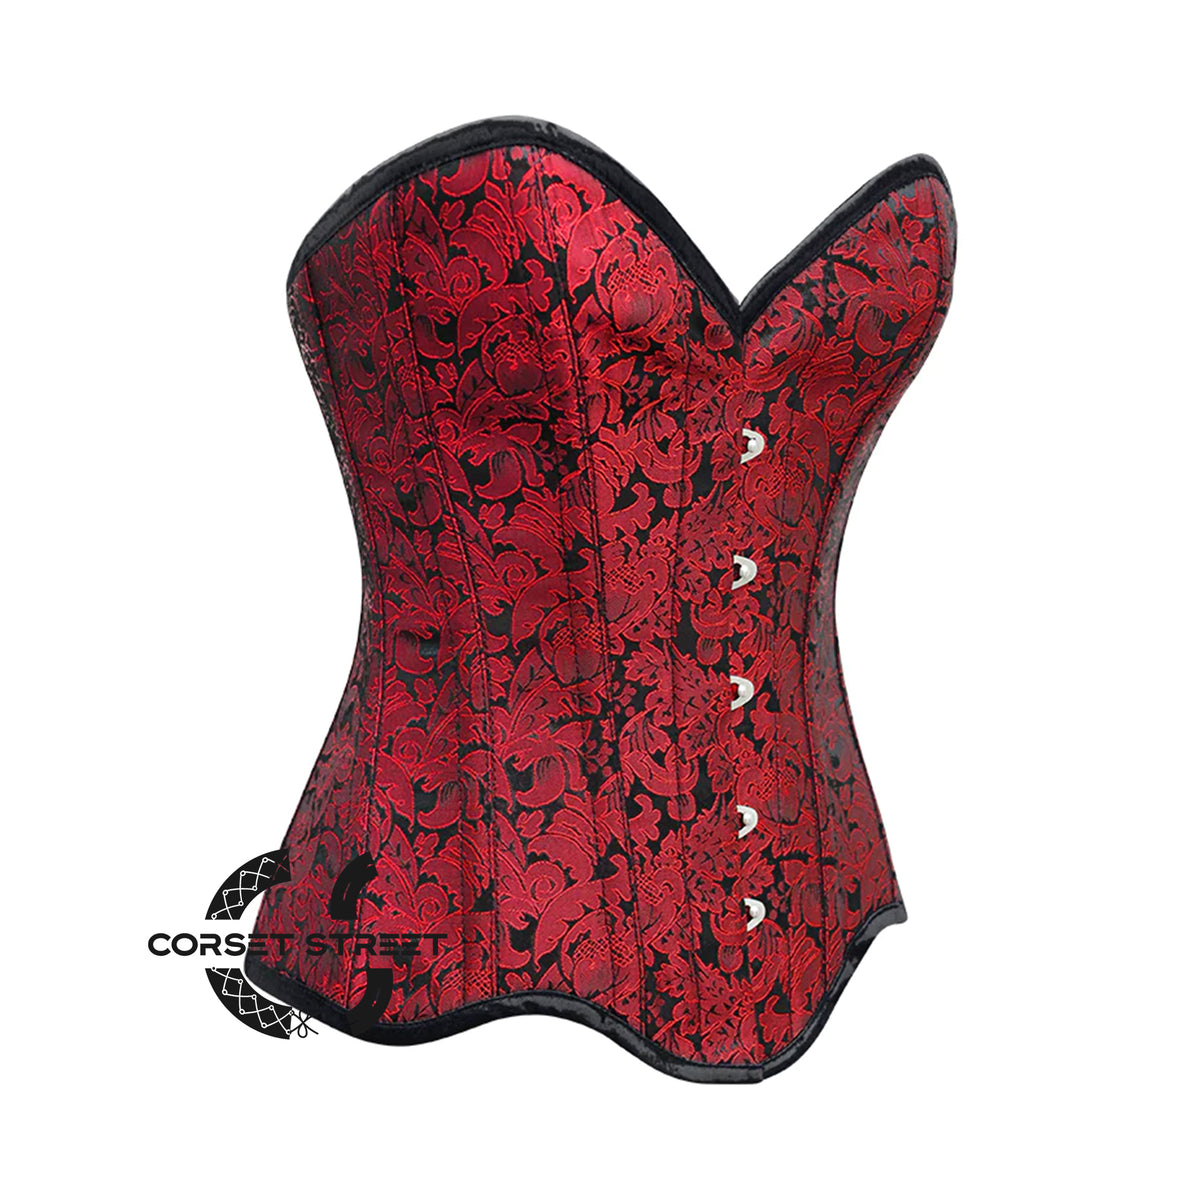 Red Brocade Curvy Design Front Busk Steampunk Gothic Overbust Corset